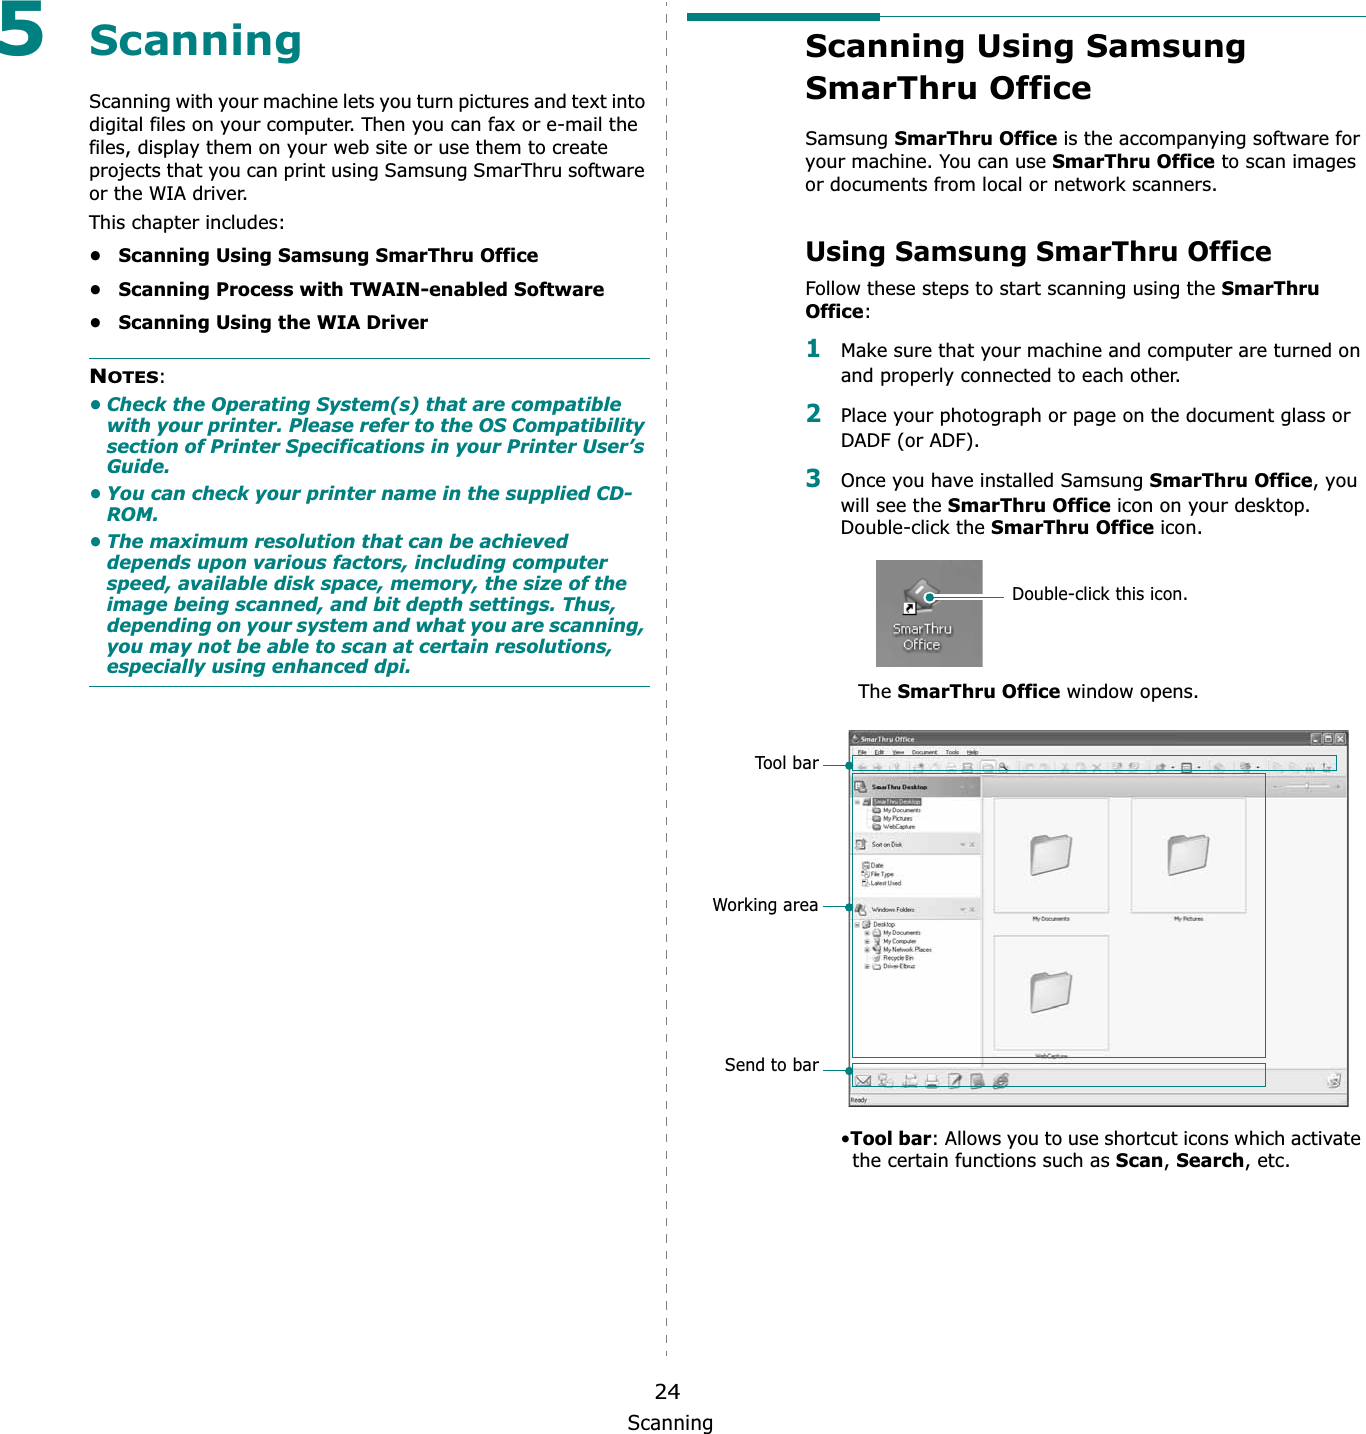 Scanning245ScanningScanning with your machine lets you turn pictures and text into digital files on your computer. Then you can fax or e-mail the files, display them on your web site or use them to create projects that you can print using Samsung SmarThru software or the WIA driver.This chapter includes:• Scanning Using Samsung SmarThru Office• Scanning Process with TWAIN-enabled Software• Scanning Using the WIA DriverNOTES:• Check the Operating System(s) that are compatible with your printer. Please refer to the OS Compatibility section of Printer Specifications in your Printer User’s Guide.• You can check your printer name in the supplied CD-ROM.• The maximum resolution that can be achieved depends upon various factors, including computer speed, available disk space, memory, the size of the image being scanned, and bit depth settings. Thus, depending on your system and what you are scanning, you may not be able to scan at certain resolutions, especially using enhanced dpi.Scanning Using Samsung SmarThru Office Samsung SmarThru Office is the accompanying software for your machine. You can use SmarThru Office to scan images or documents from local or network scanners.Using Samsung SmarThru OfficeFollow these steps to start scanning using the SmarThru Office:1Make sure that your machine and computer are turned on and properly connected to each other. 2Place your photograph or page on the document glass or DADF (or ADF).3Once you have installed Samsung SmarThru Office, you will see the SmarThru Office icon on your desktop. Double-click the SmarThru Office icon.TheSmarThru Office window opens.•Tool bar: Allows you to use shortcut icons which activate the certain functions such as Scan,Search, etc.Double-click this icon.Too l b arWorking areaSend to bar